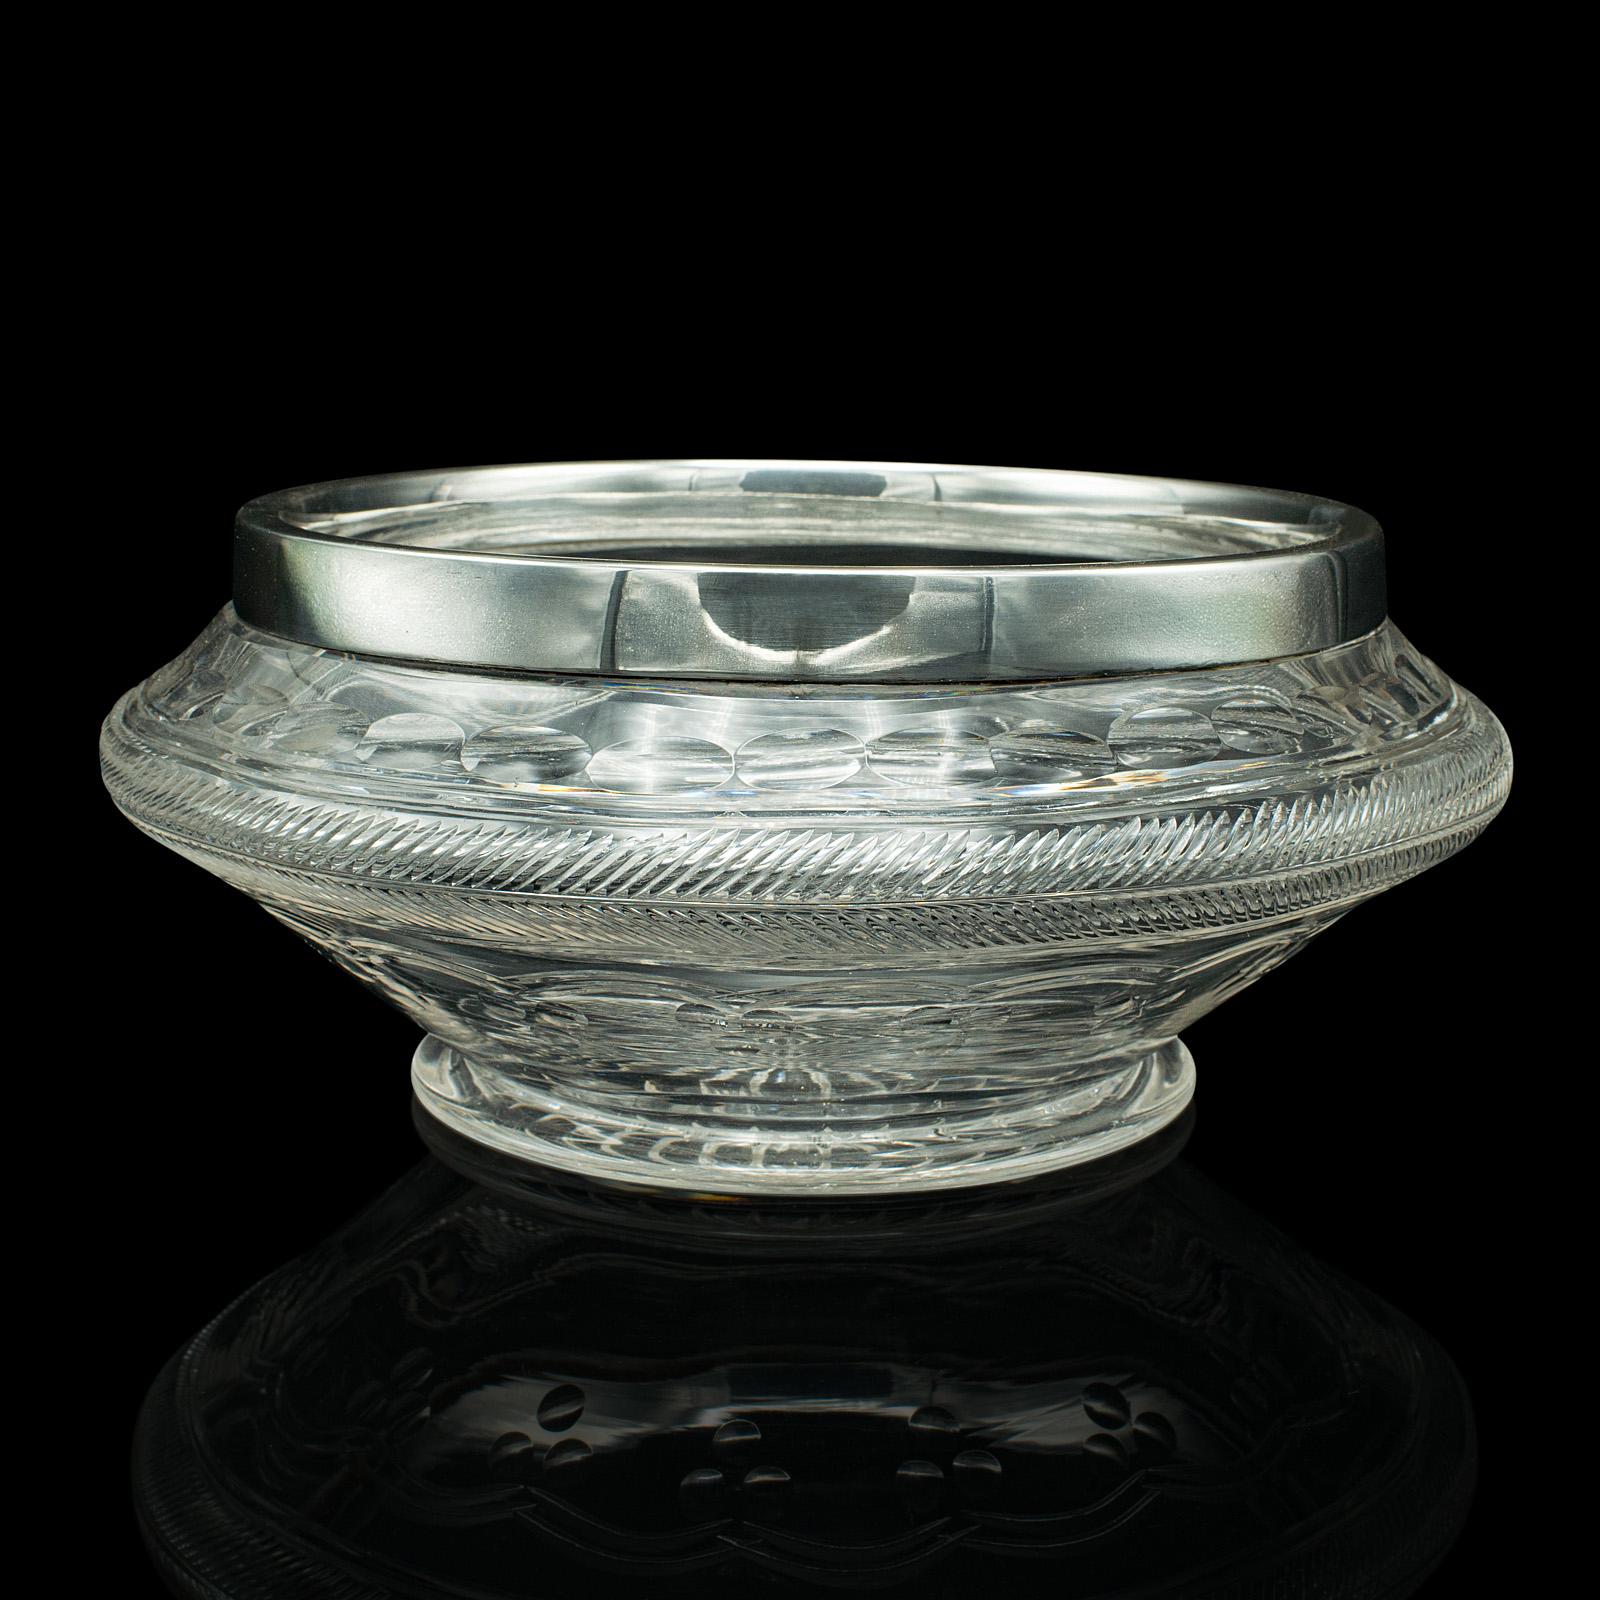 Antique Peach Bowl, English, Cut Glass, Silver Plate, Fruit, Edwardian, C.1910 In Good Condition For Sale In Hele, Devon, GB